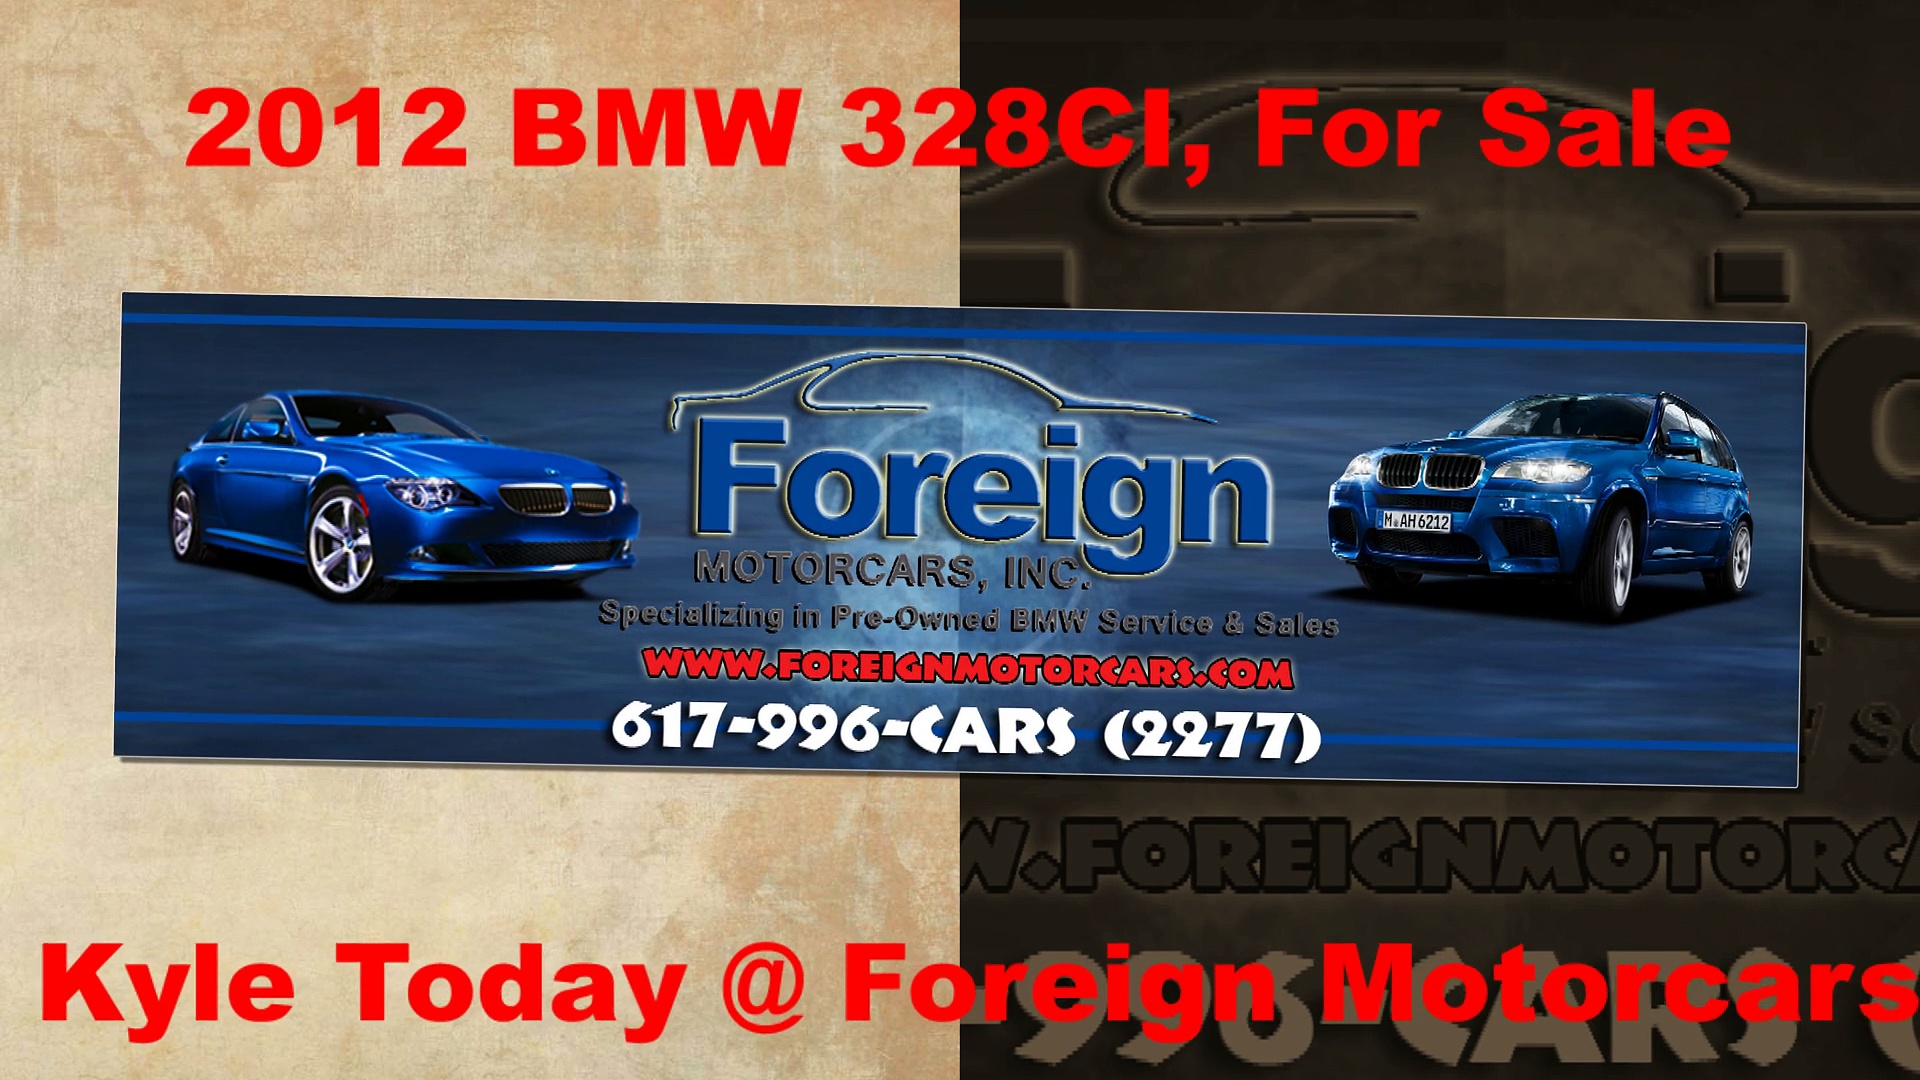 2012 BMW 328CI, For Sale, Foreign Motorcars Inc, Quincy MA, BMW Service, BMW Repair, BMW Sales